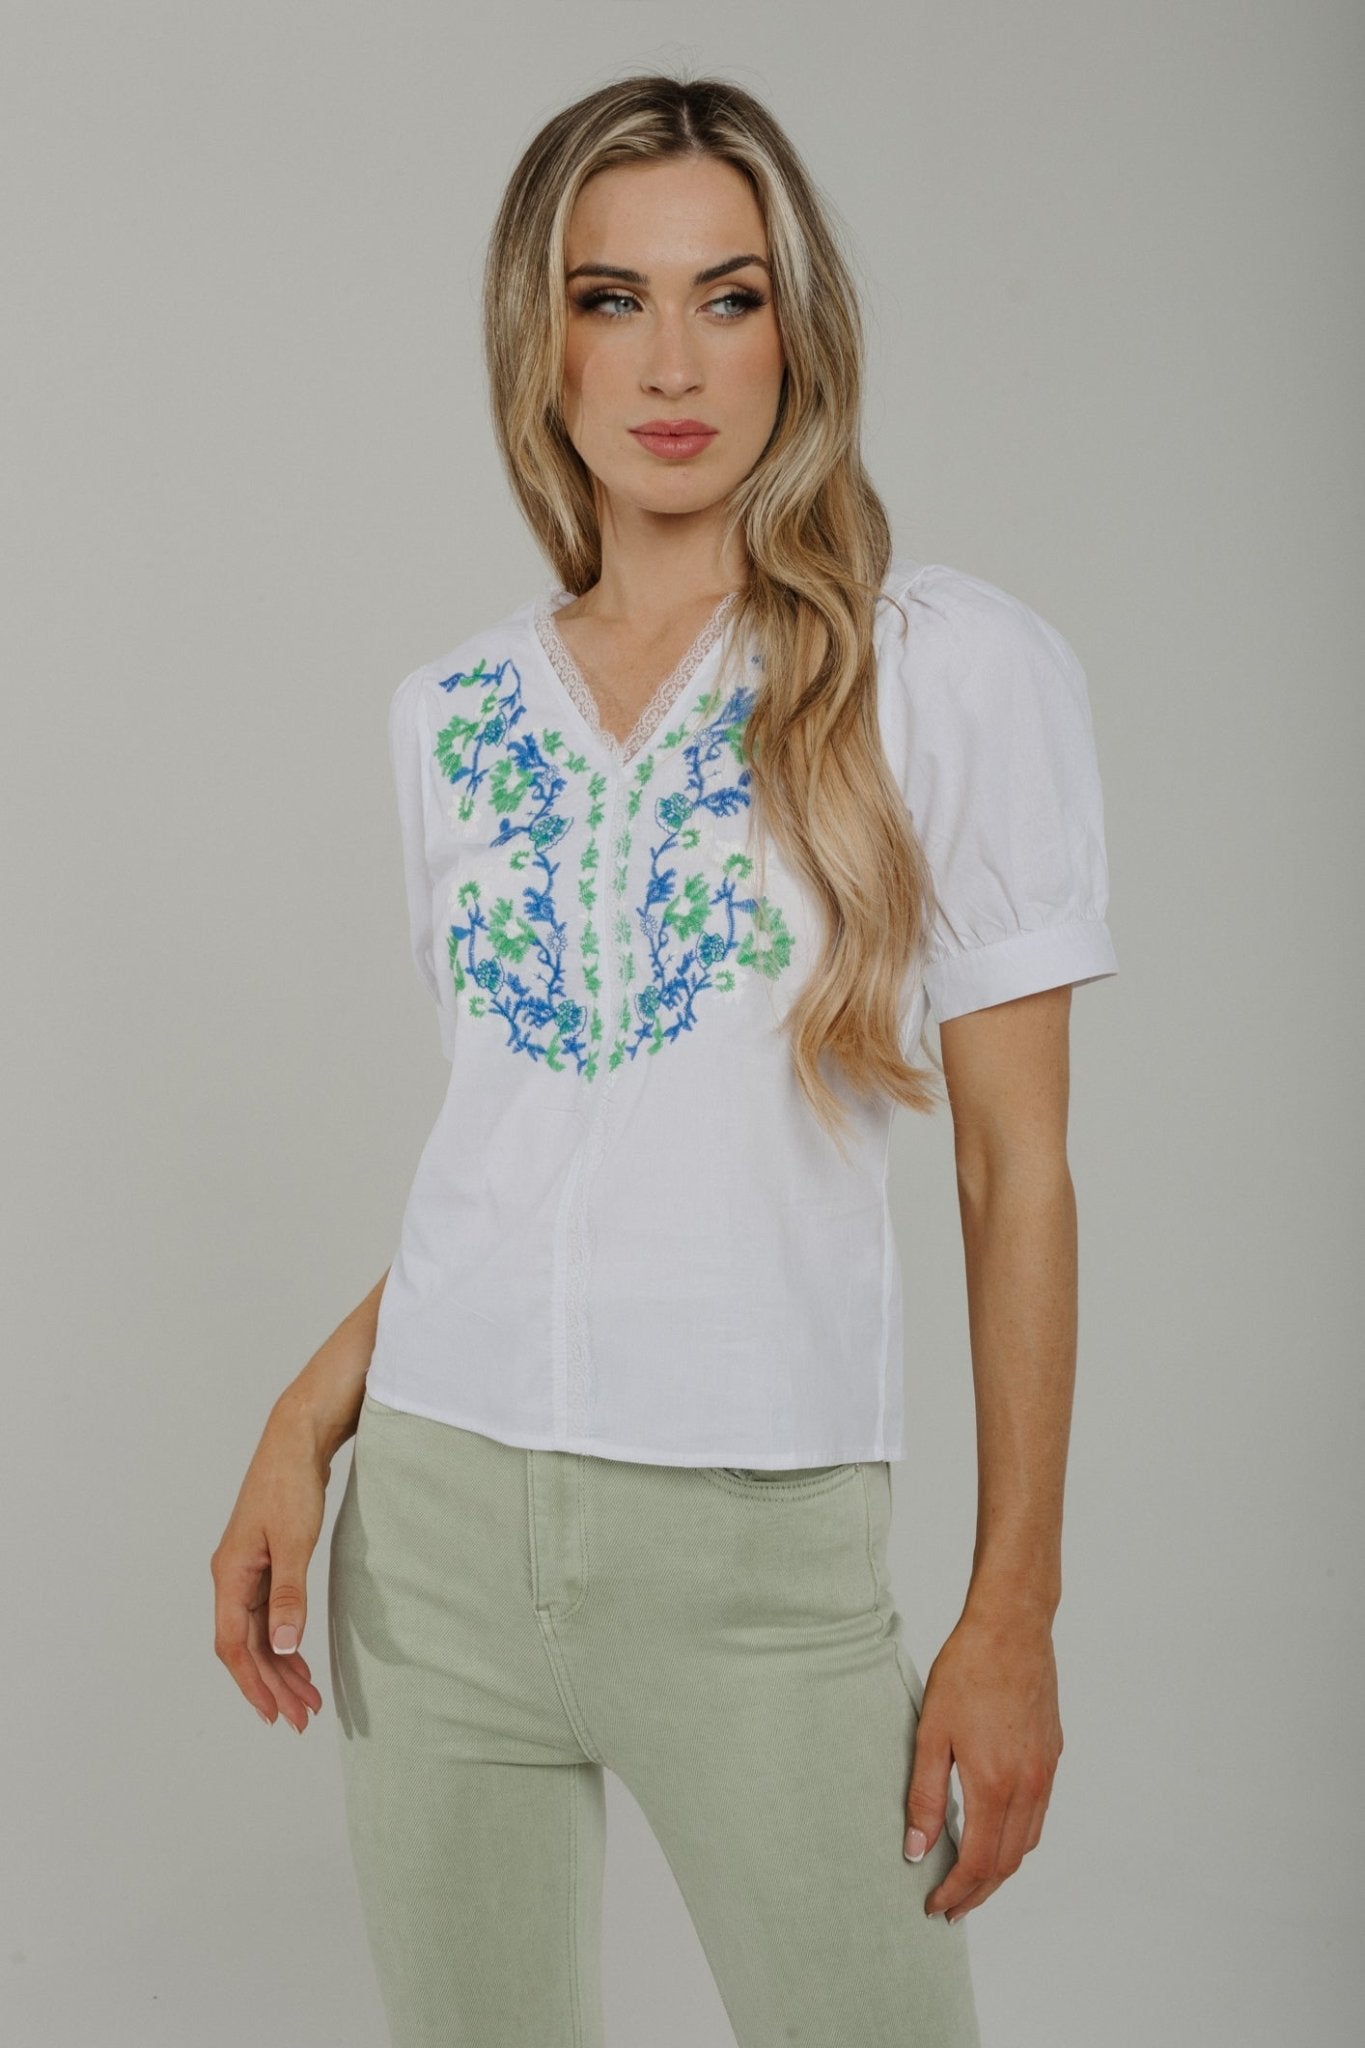 Sally Blue Embroidered Blouse In White - The Walk in Wardrobe